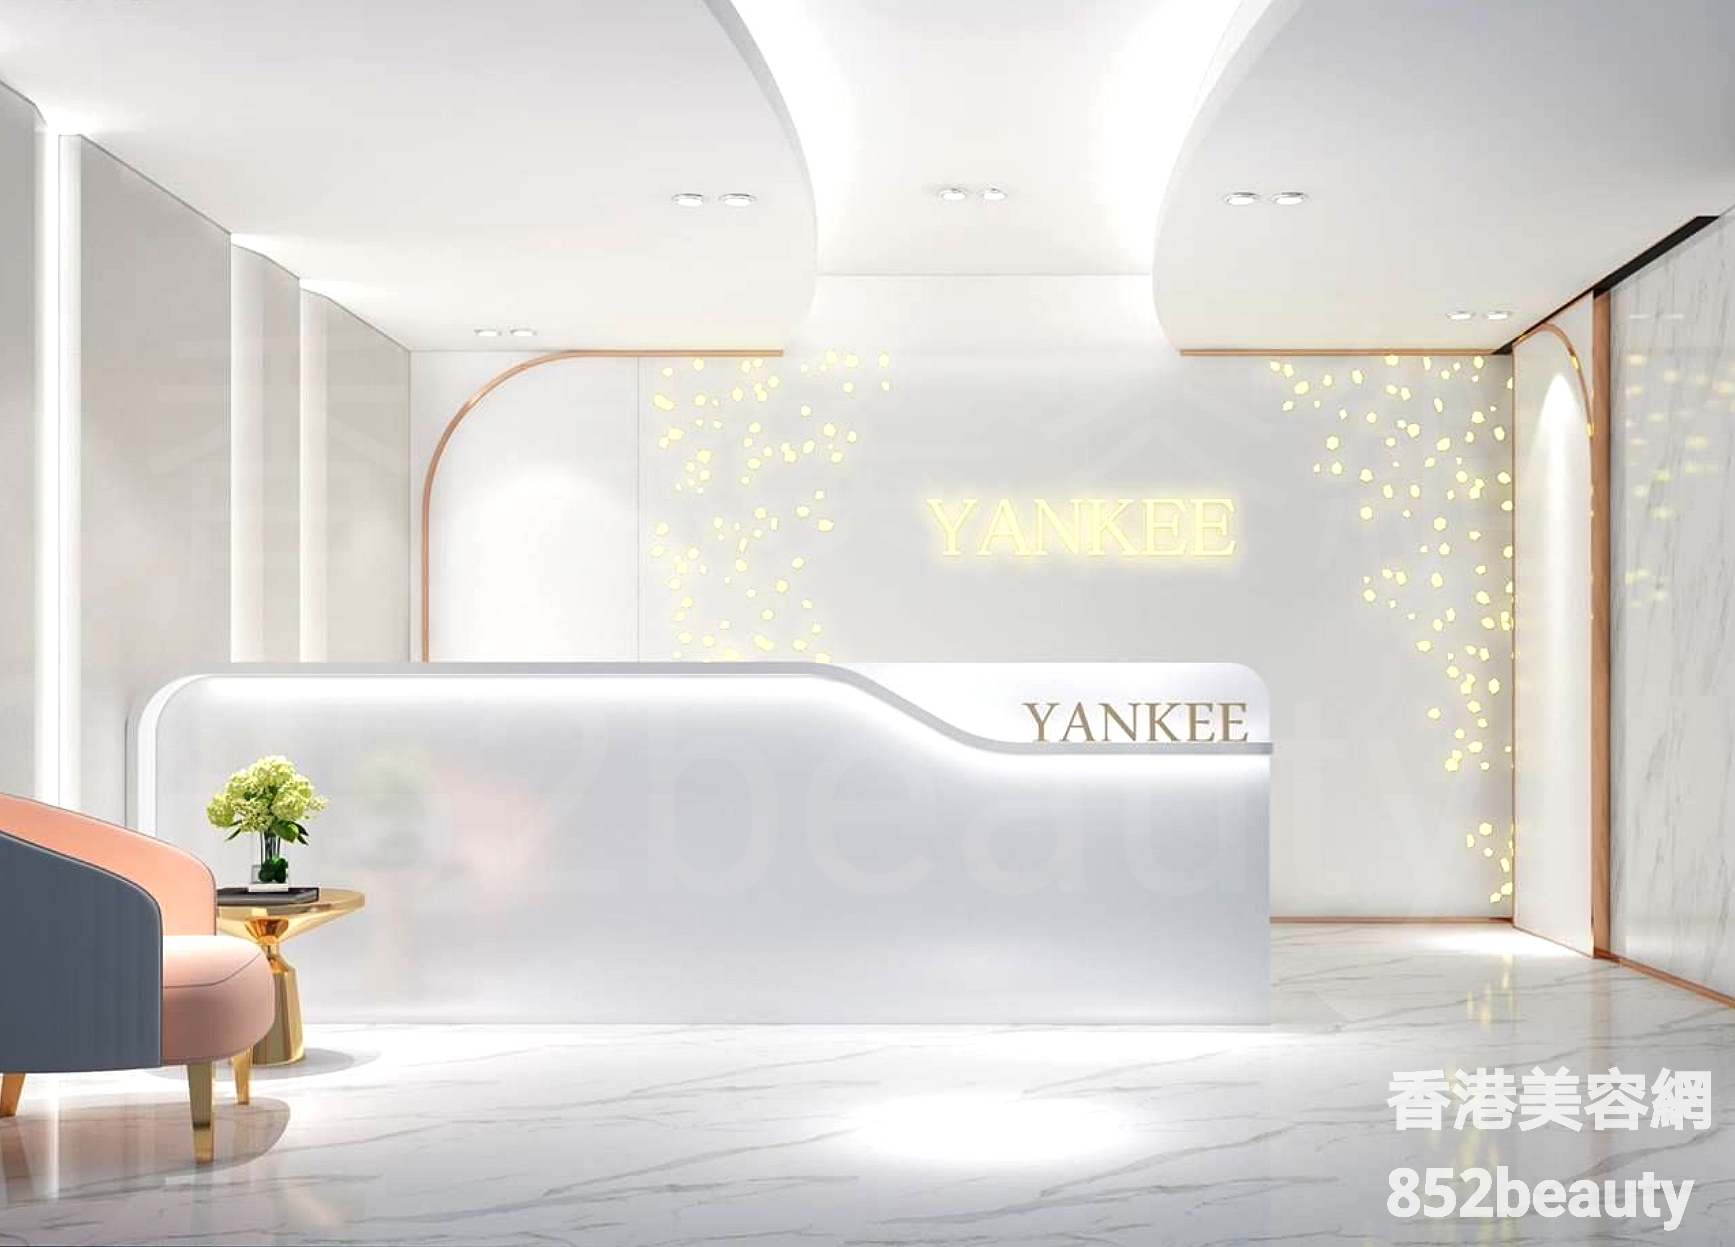 Hand and foot care: Yankee Beauty 逸姬美容 (尖沙咀醫學部)